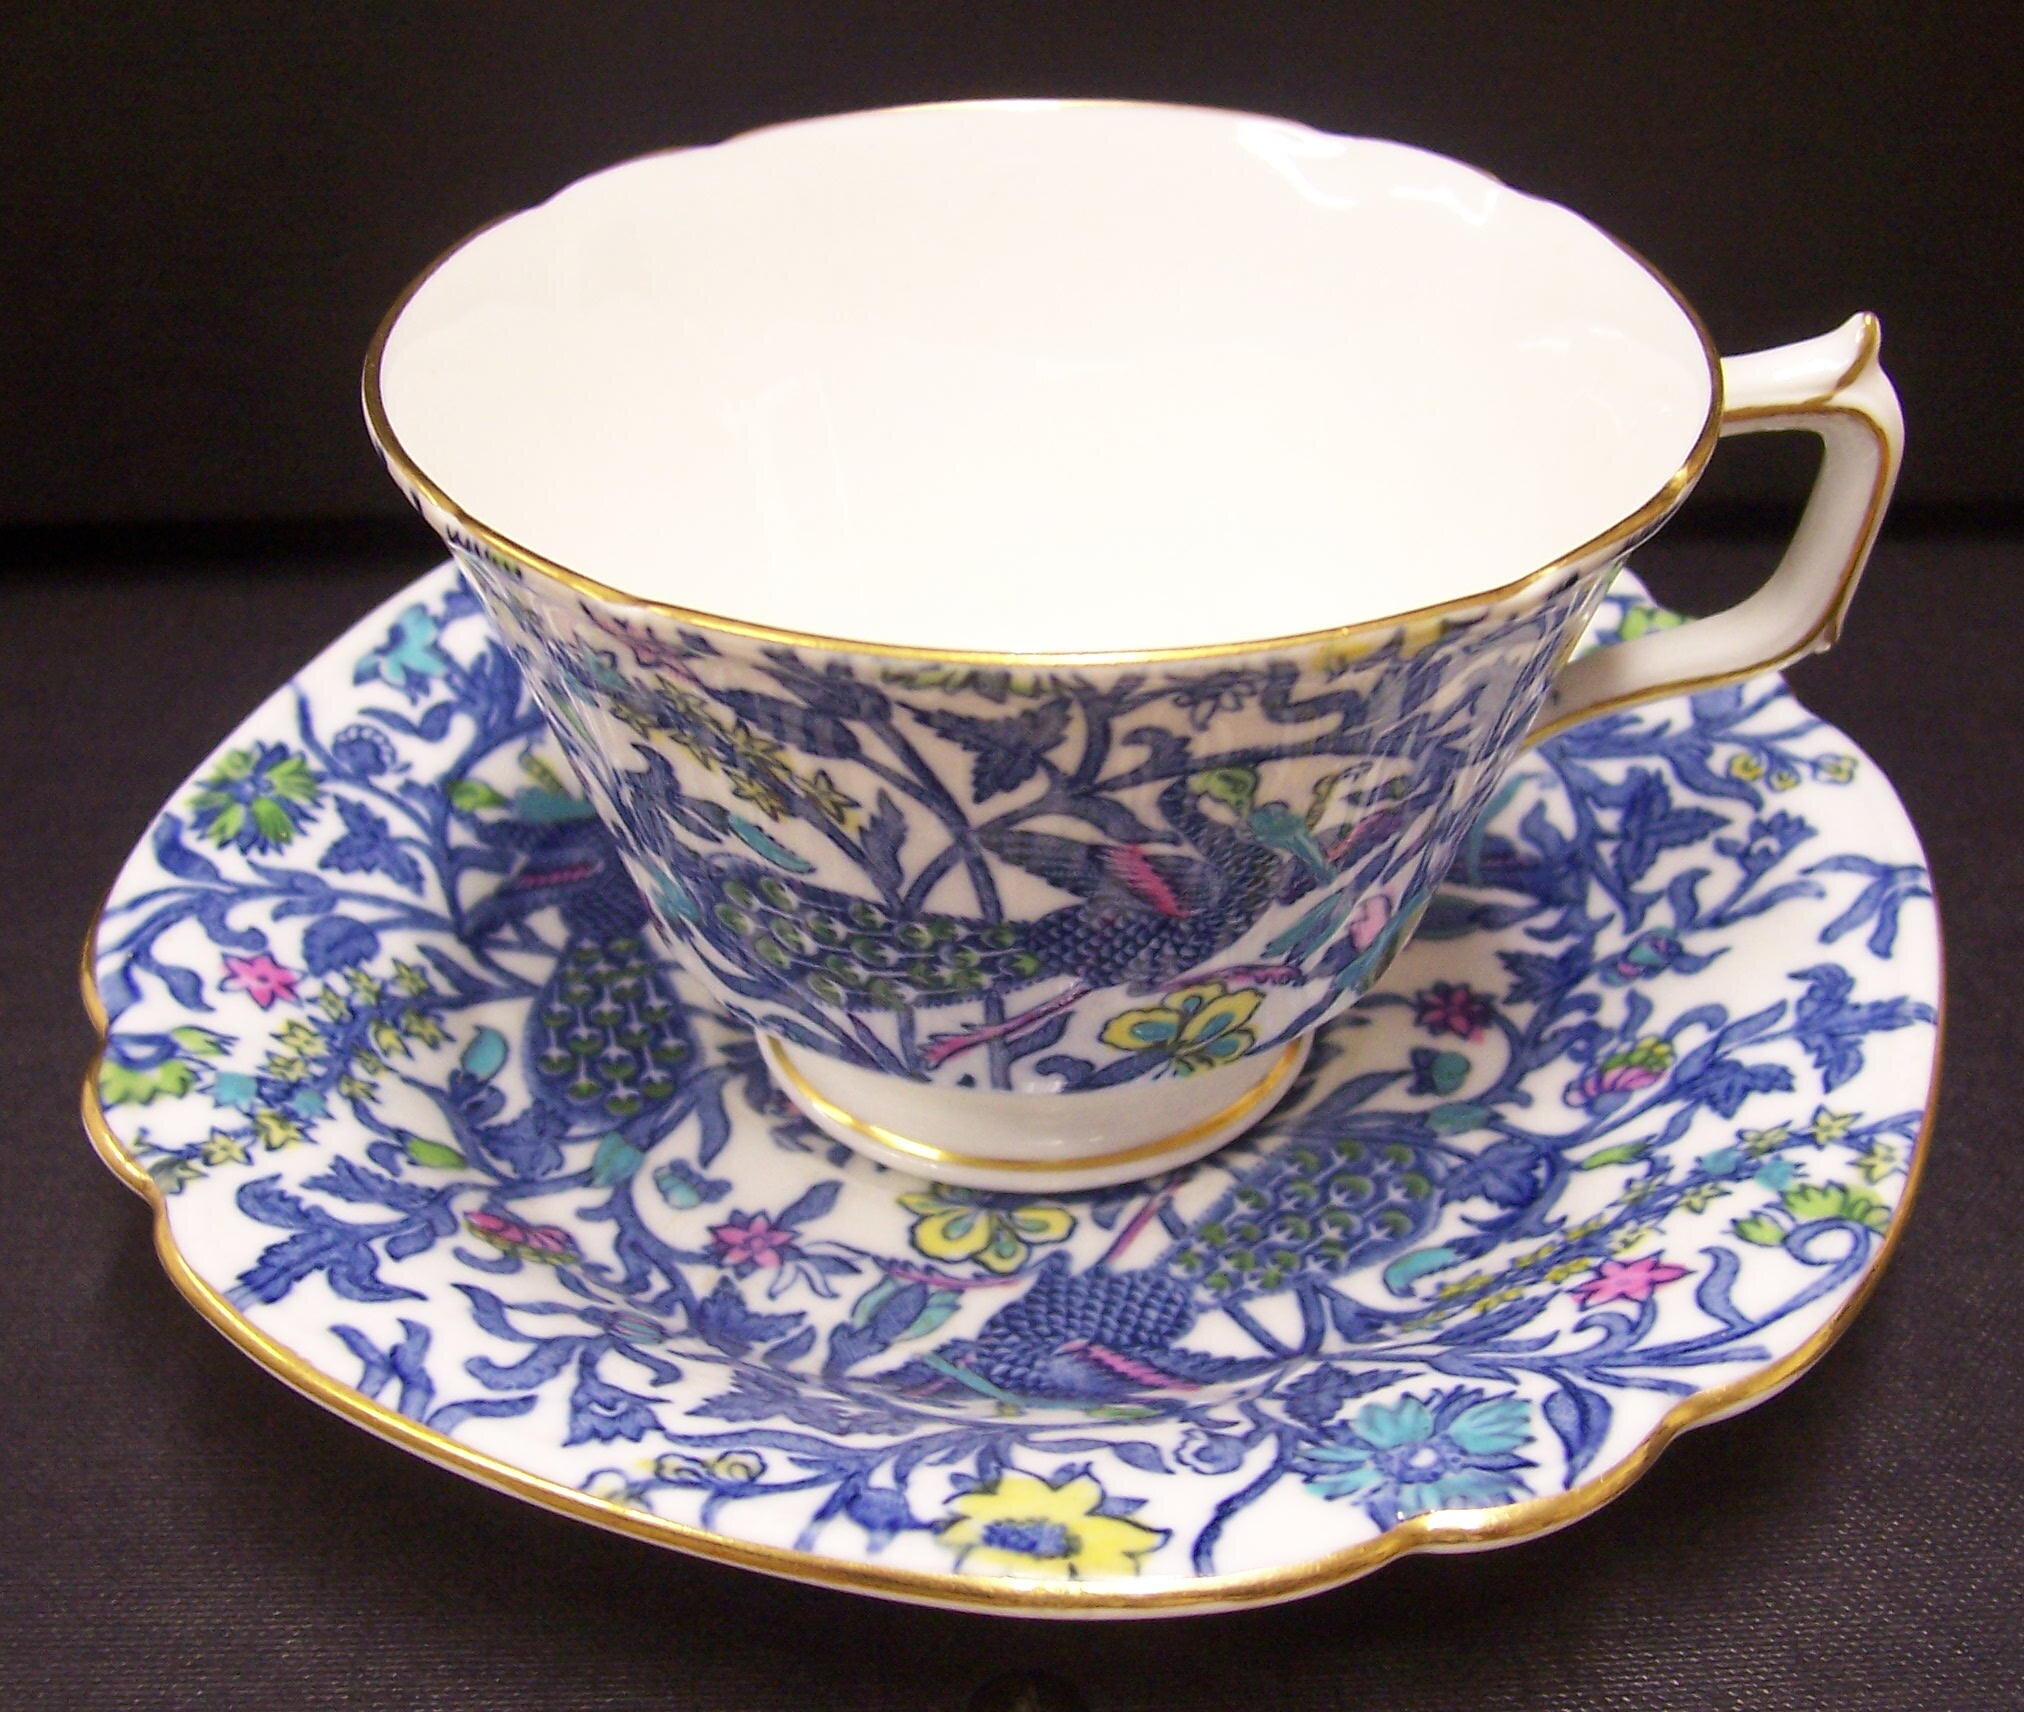 Details about   Luxury Bone China Teacup Set of 6 Cups White on Blue Saucers Evil Eye Design 